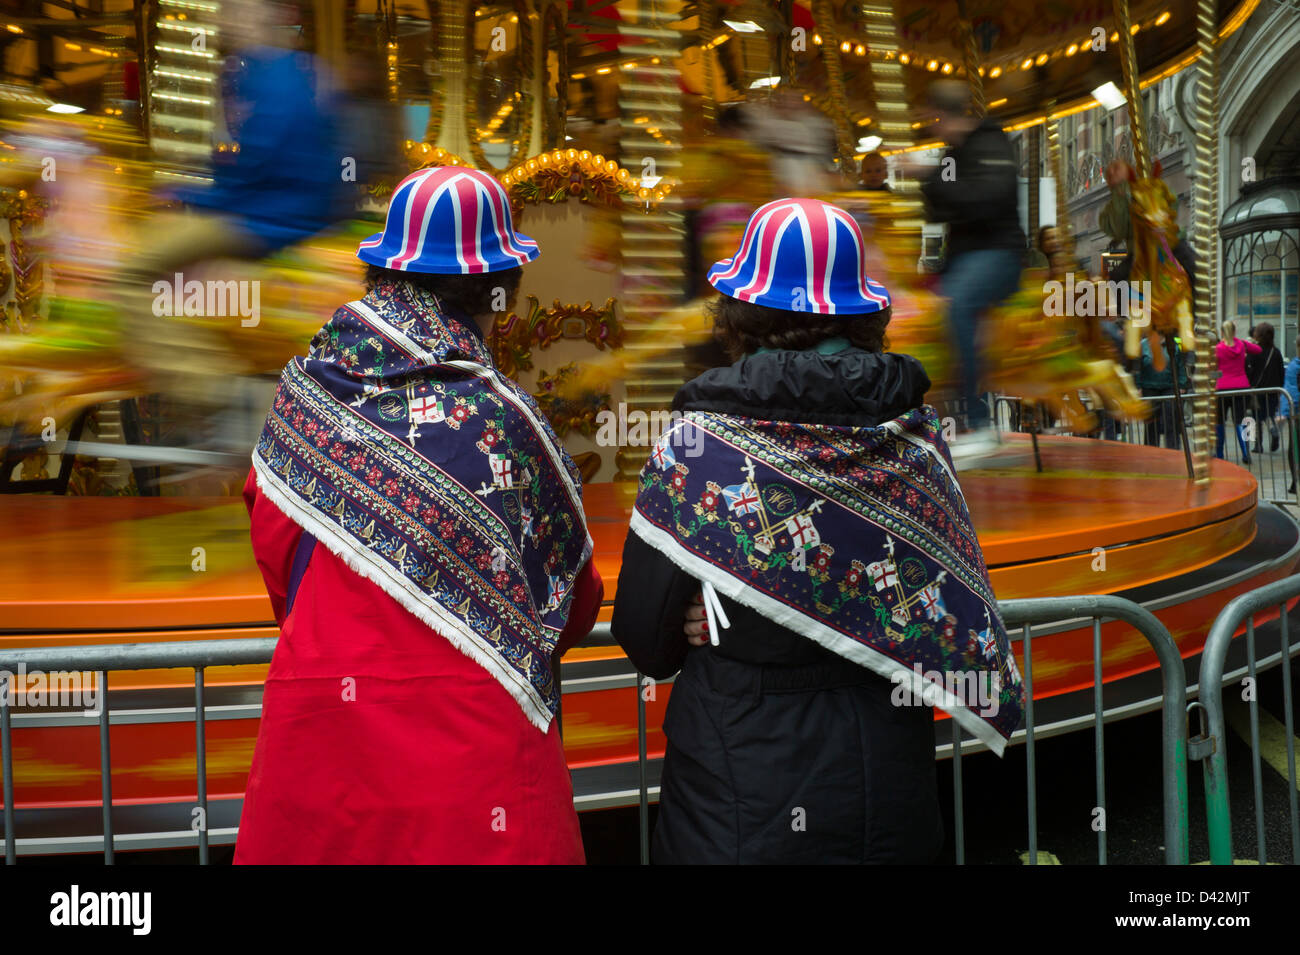 Queens Jubilee Piccadilly Street Party, London England, June 2012. Twins in matching hats enjoying the street party carousel. Stock Photo